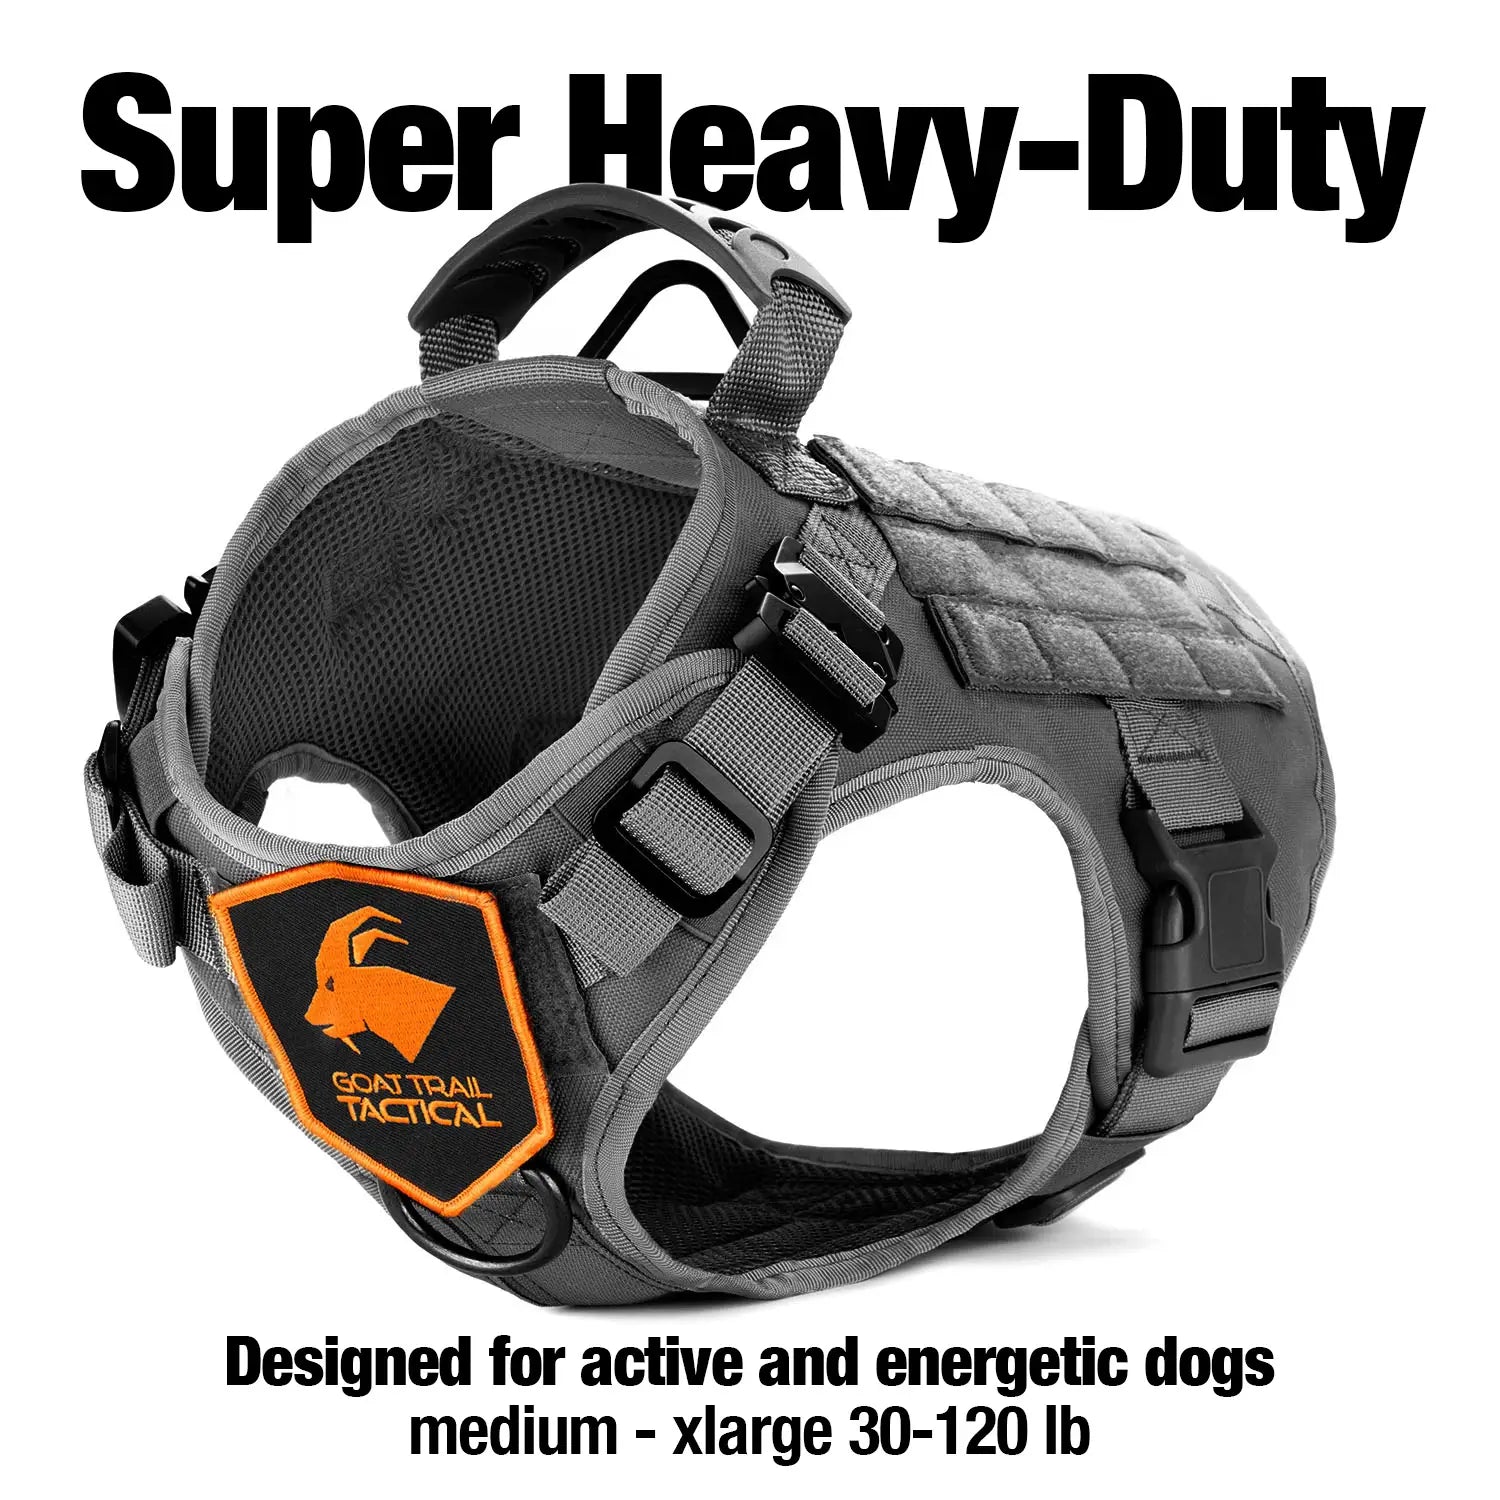 Goat-Trail-Tactical-Supoer-Heavy-Duty-Harnesss-sizes